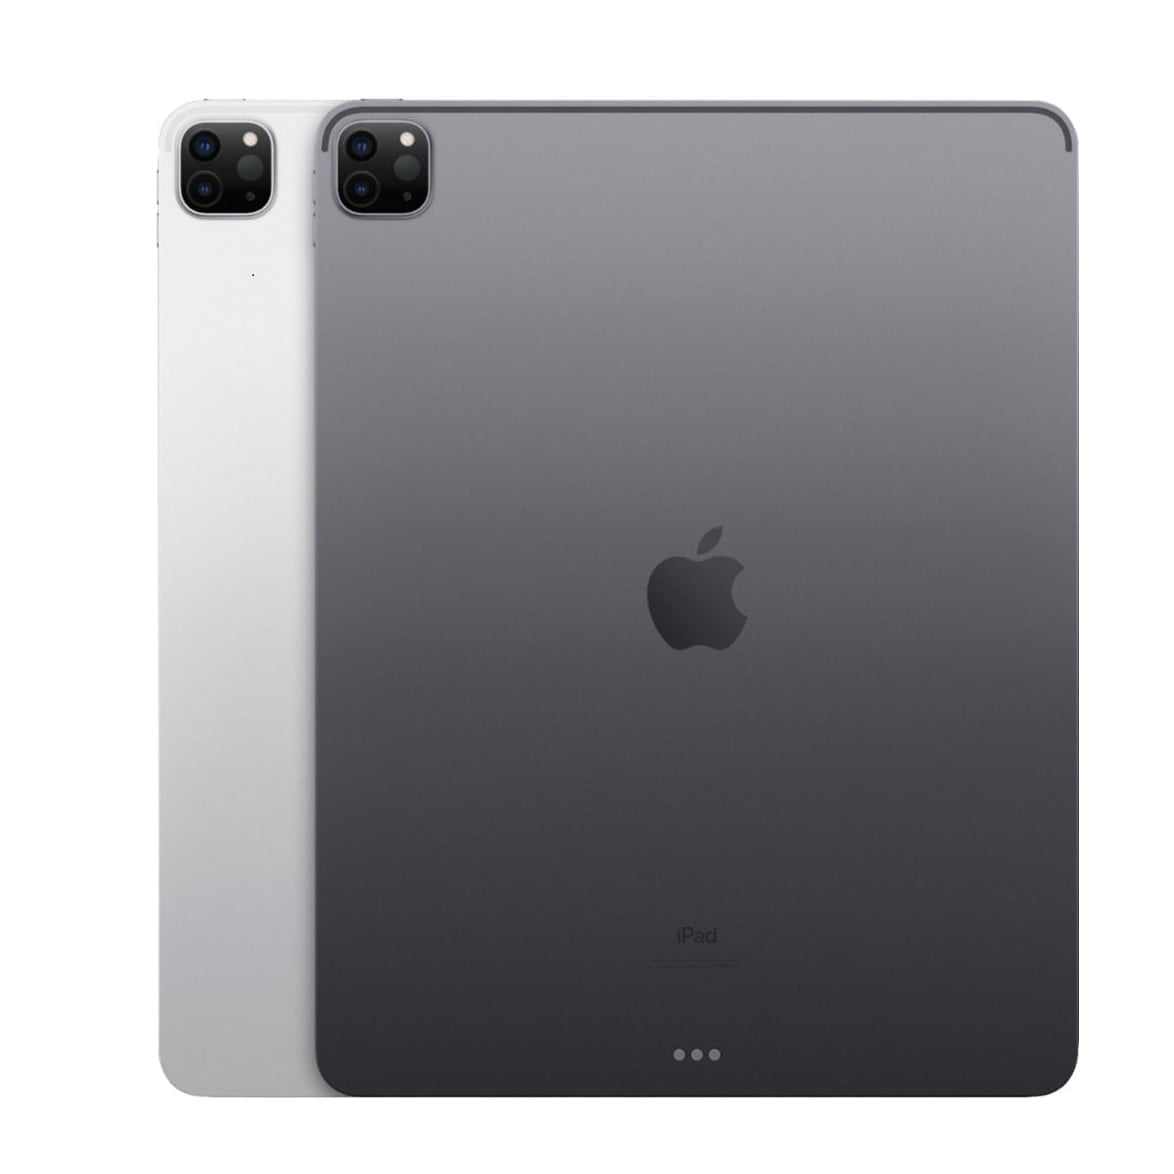 4264603Cv14D Apple &Lt;H1&Gt;Apple - 12.9-Inch Ipad Pro Latest Model (5Th Generation) With Wi-Fi - 256Gb - Space Gray&Lt;/H1&Gt; Https://Www.youtube.com/Watch?V=Aoq49Euwnio Ipad Pro Features The Powerful Apple M1 Chip For Next-Level Performance And All-Day Battery Life.an Immersive 12.9-Inch Liquid Retina Xdr Display For Viewing And Editing Hdr Photos And Videos. And A Front Camera With Center Stage Keeps You In Frame Automatically During Video Calls. Ipad Pro Has Pro Cameras And A Lidar Scanner For Stunning Photos, Videos, And Immersive Ar. Thunderbolt For Connecting To High-Performance Accessories. And You Can Add Apple Pencil For Note-Taking, Drawing, And Marking Up Documents, And The Magic Keyboard For A Responsive Typing Experience And Trackpad. Ipad Pro Apple - 12.9-Inch Ipad Pro Latest Model (5Th Generation) With Wi-Fi - 256Gb - Space Gray Mhnh3